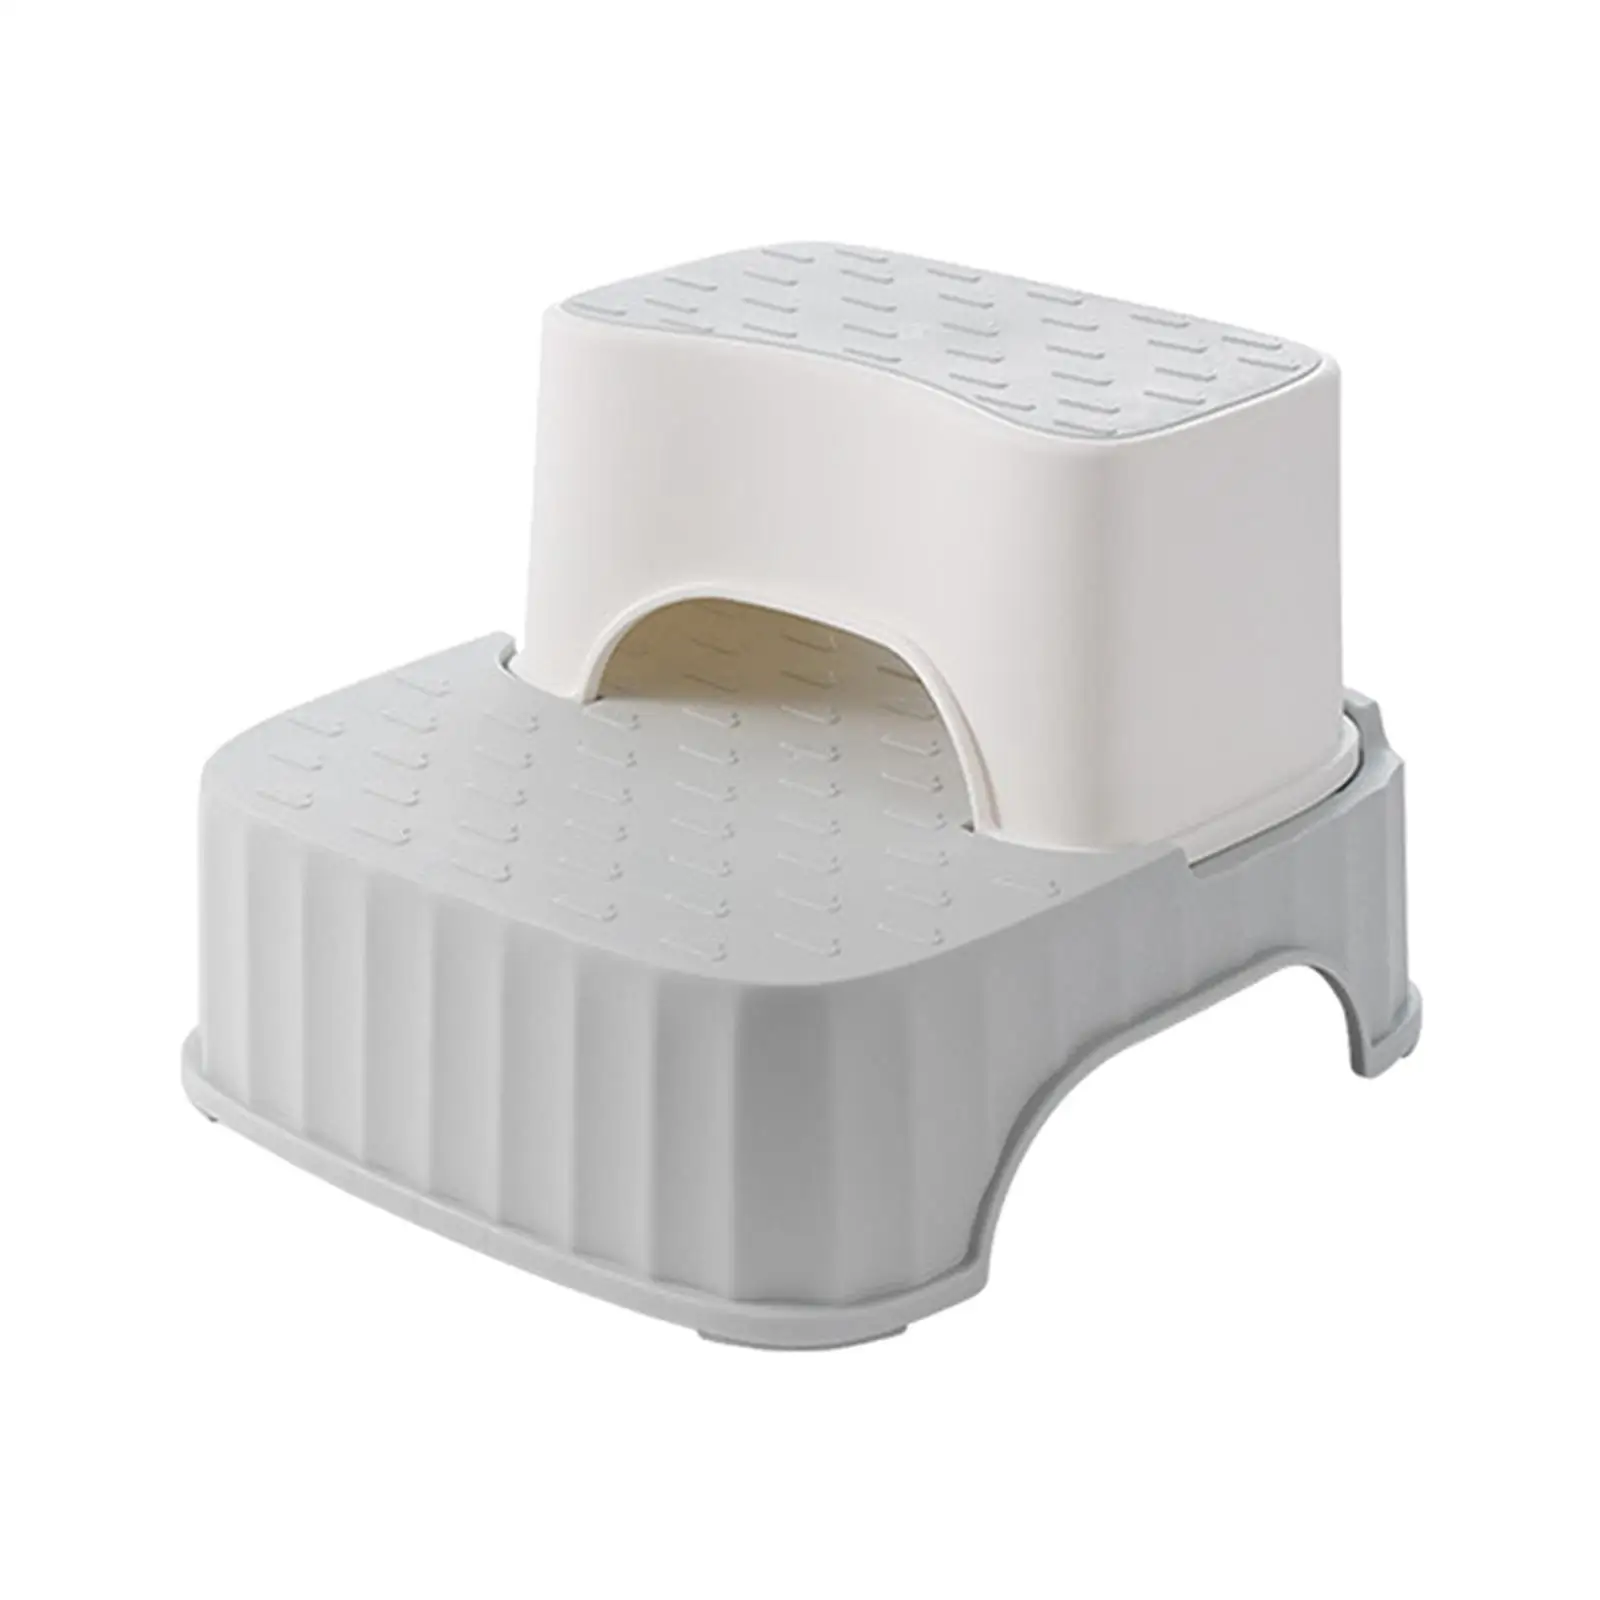 Portable Toilet Step Stool Bathroom Supplies Non Slip Foot Rest Cushion Foot Stool for Study Living Room Bedroom Holiday Gifts